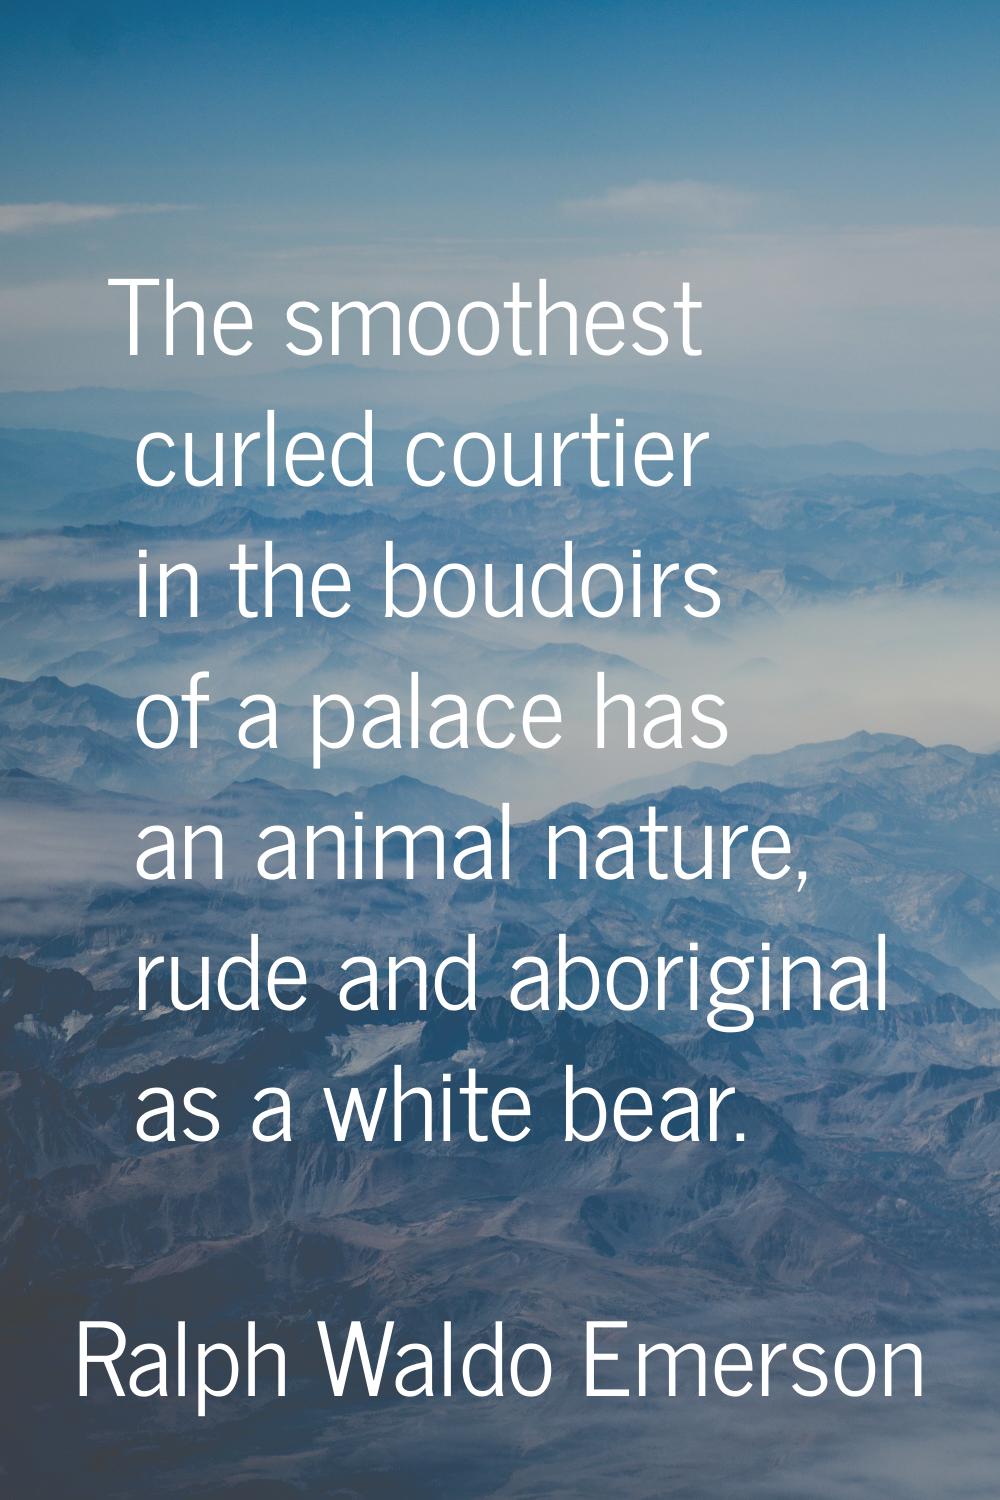 The smoothest curled courtier in the boudoirs of a palace has an animal nature, rude and aboriginal